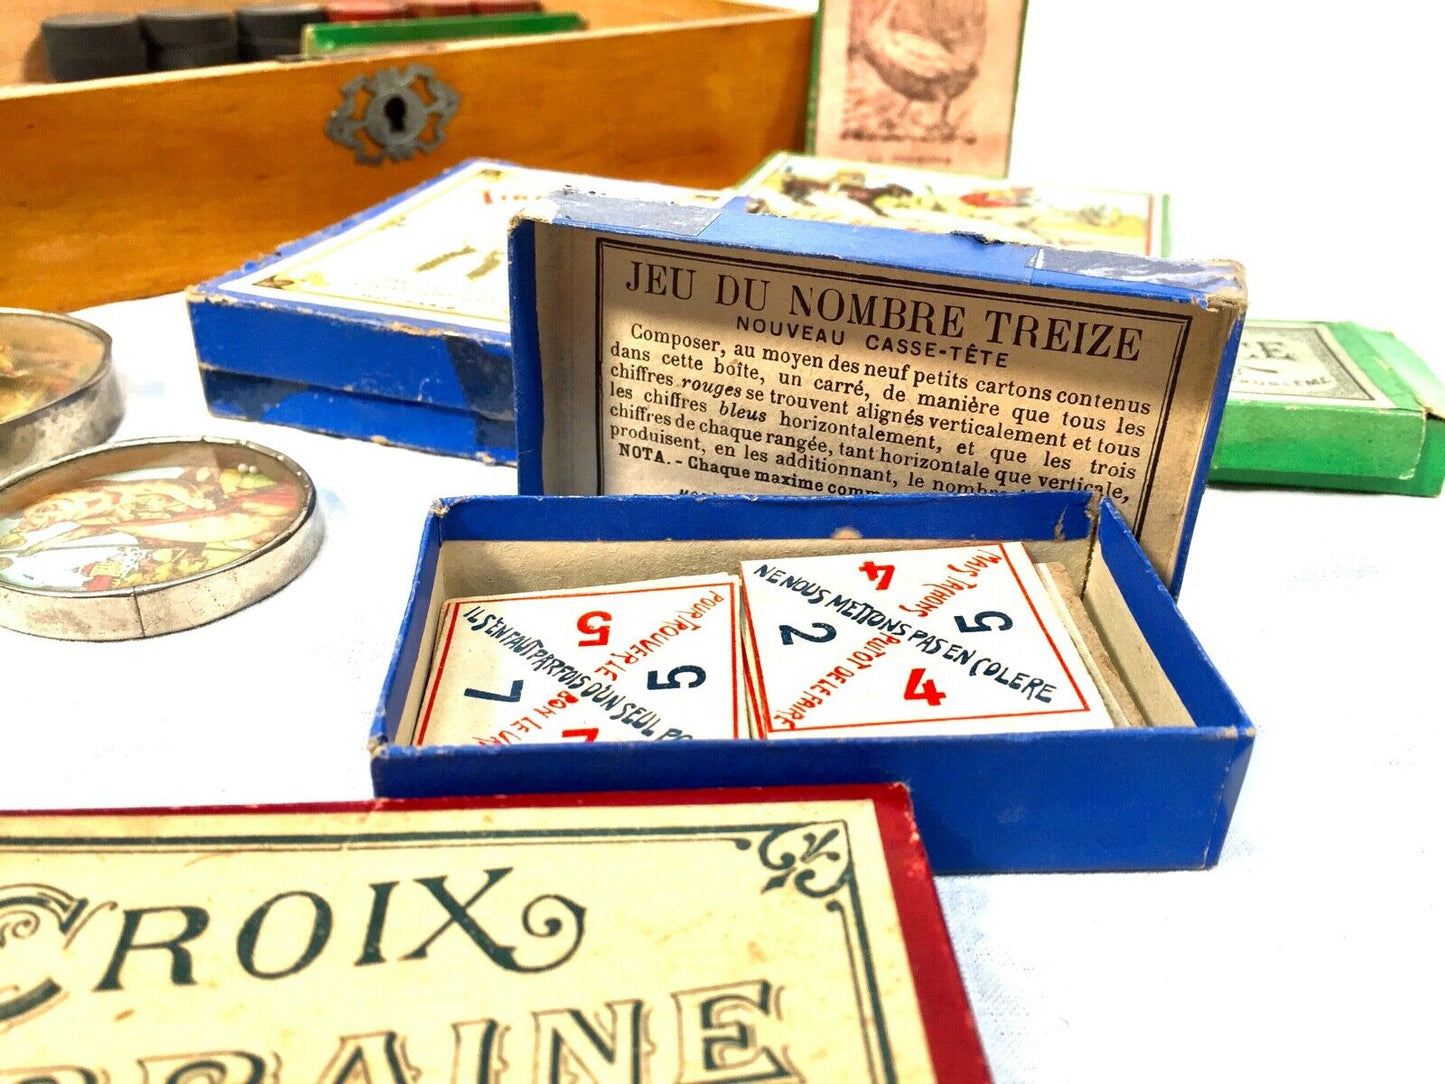 Antique Collection on French 'Jeux Nouveaux' Miniature Classic Games in Box 1900